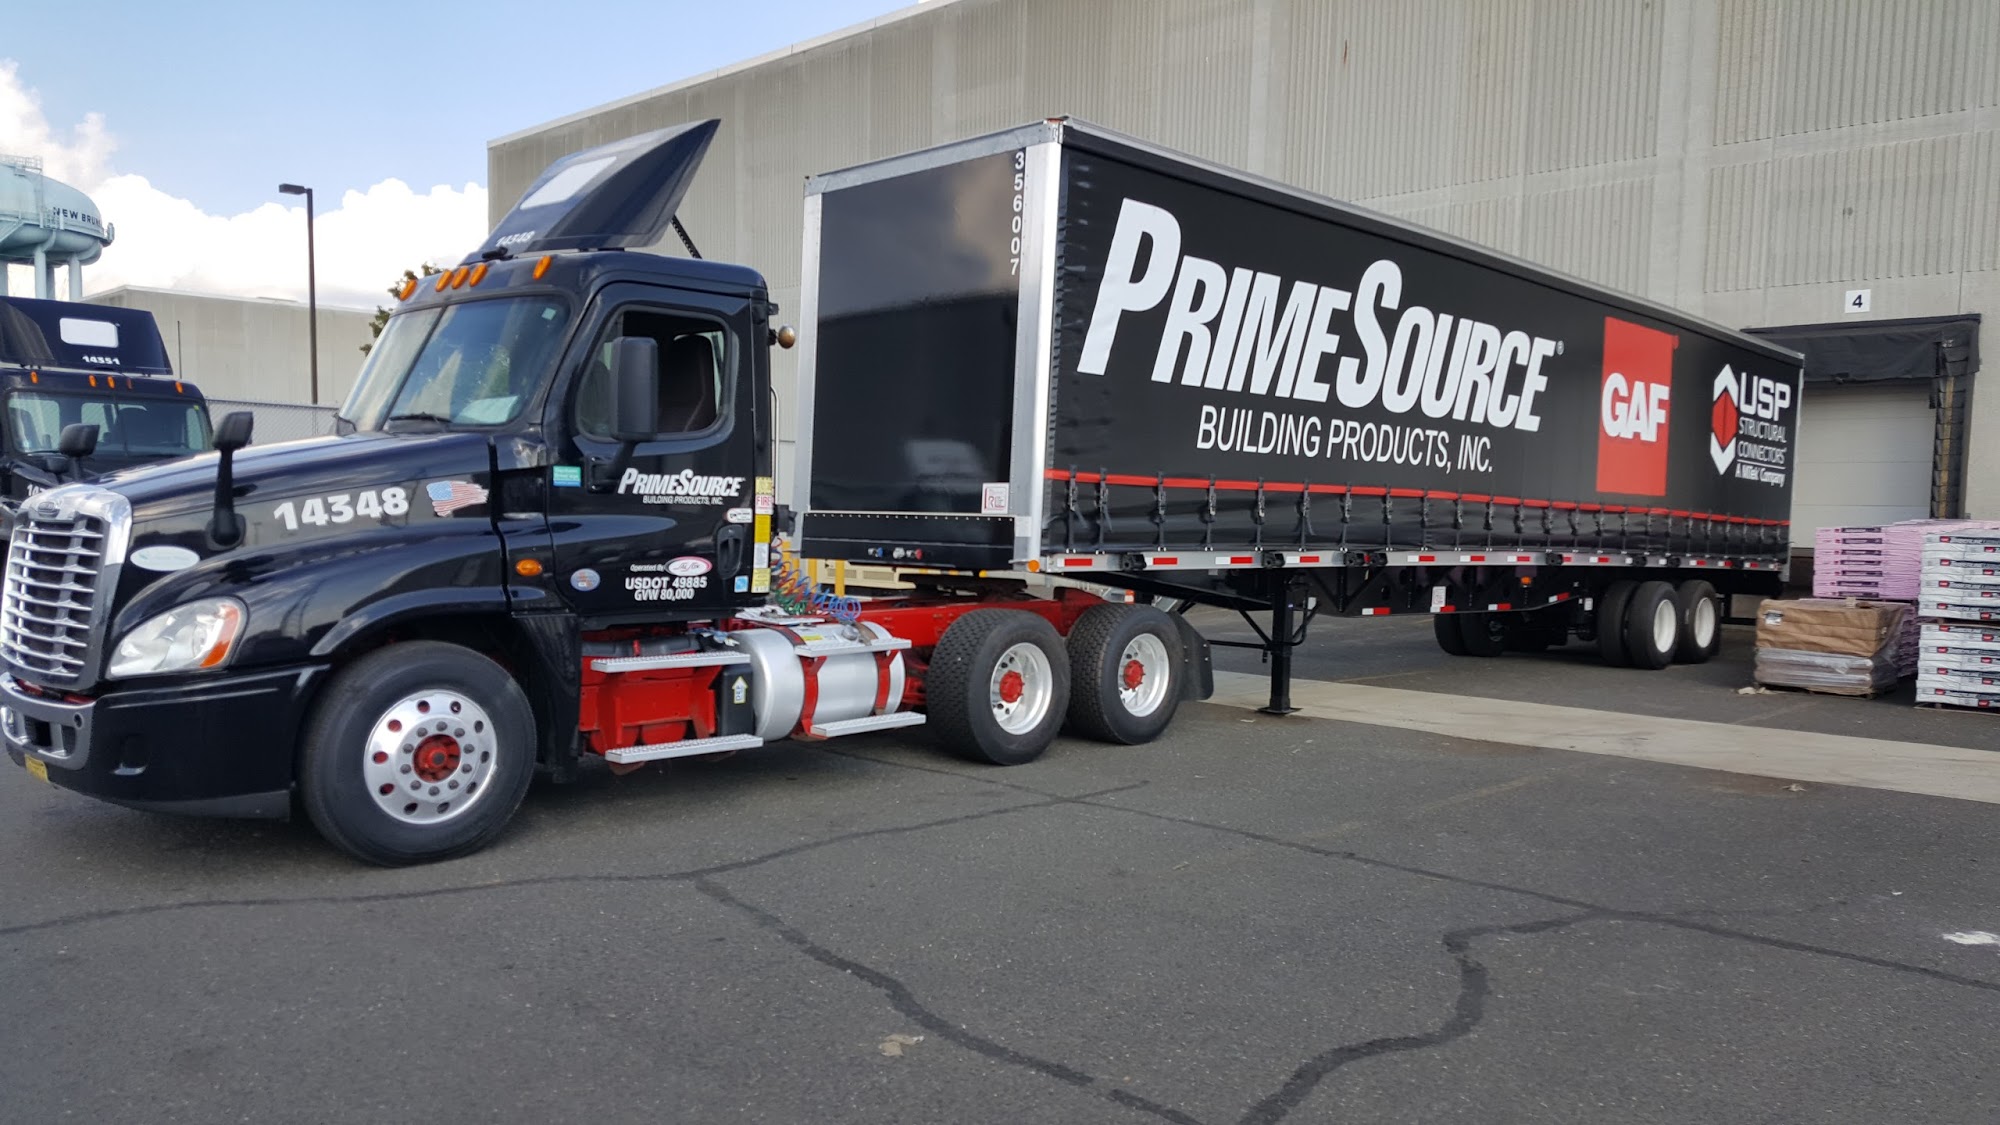 PrimeSource Building Products